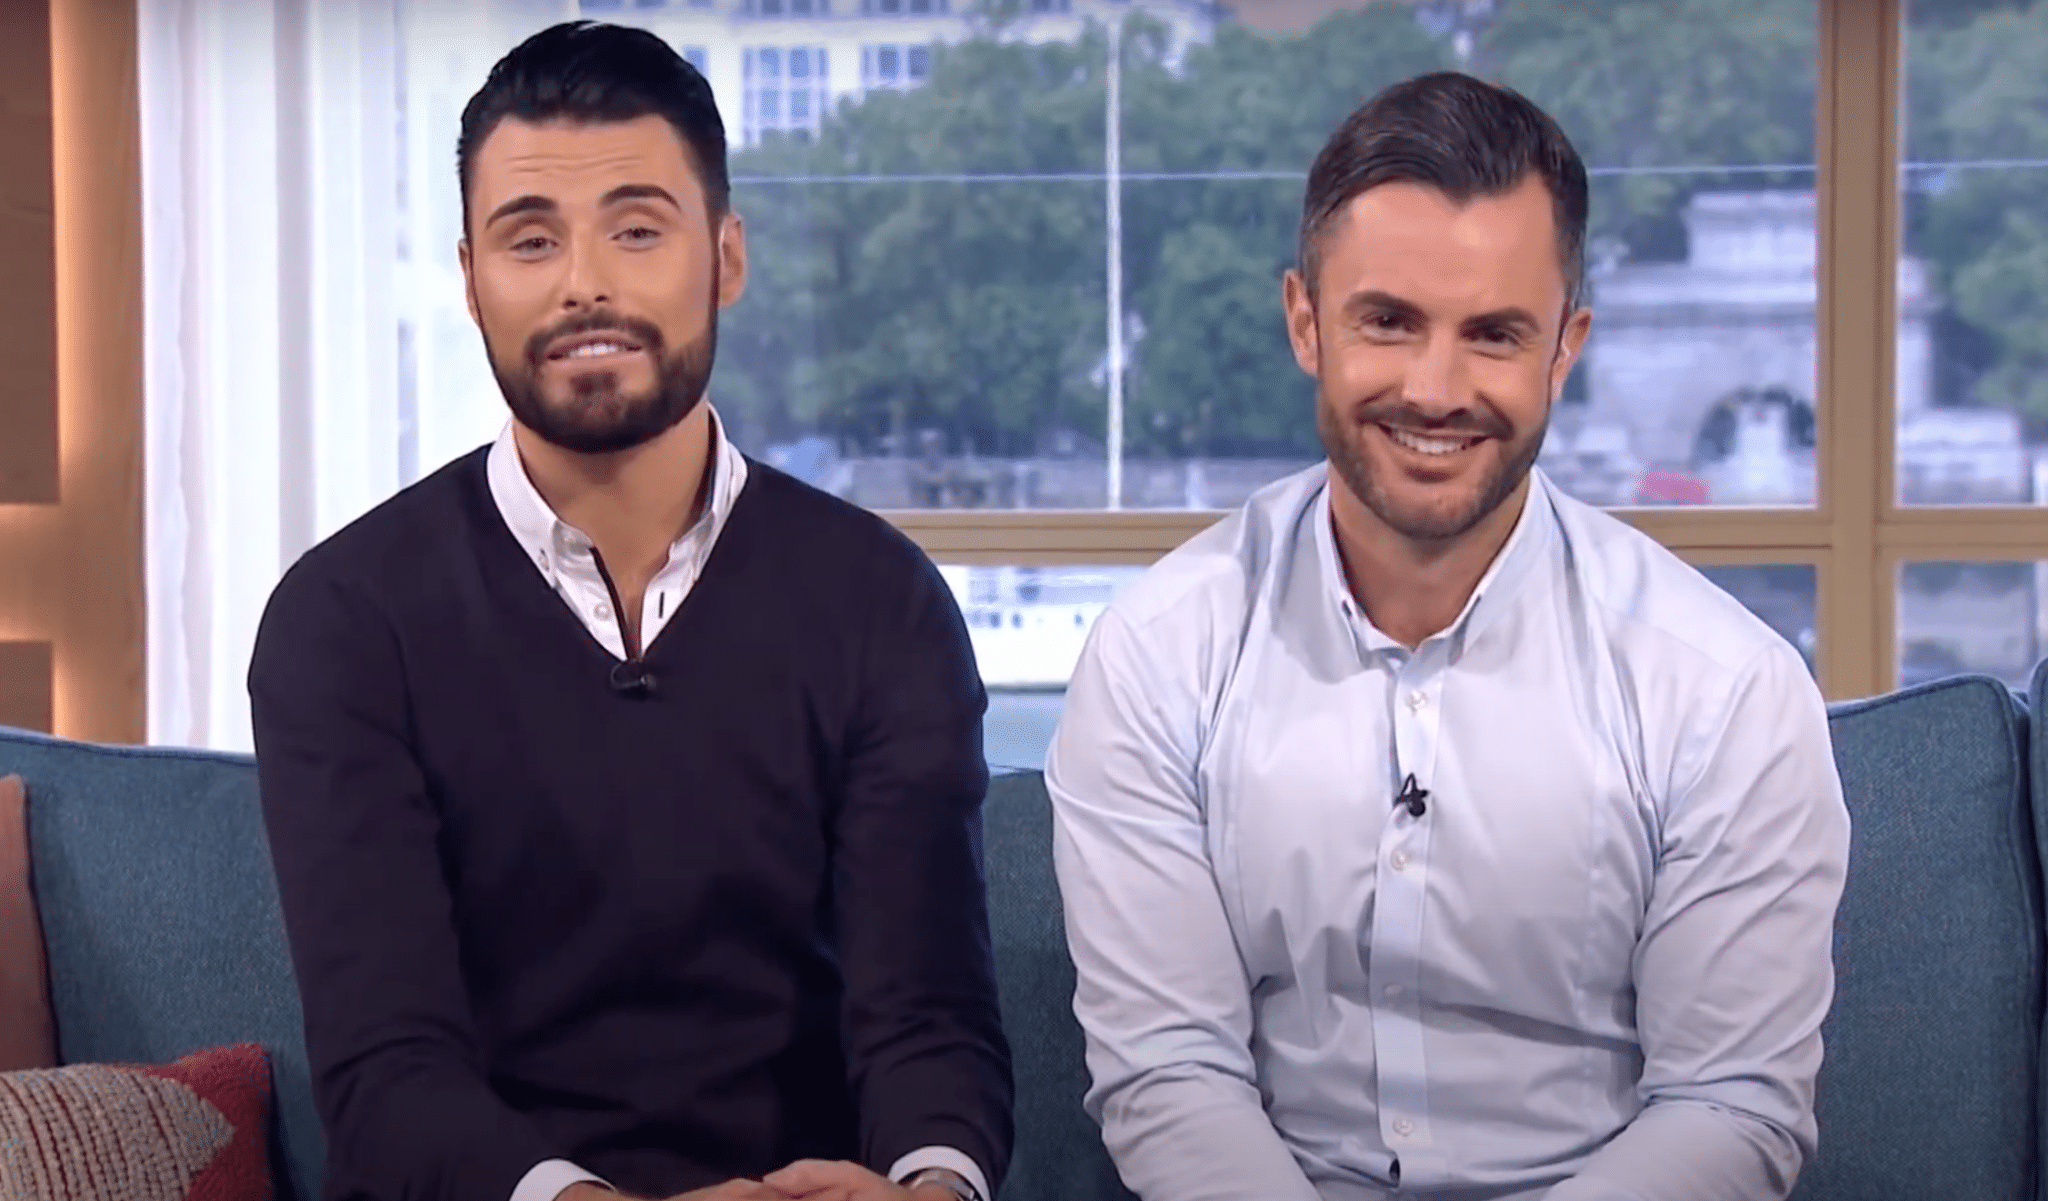 Rylan regrets not getting a pre-nup before marrying ex-husband Dan Neal